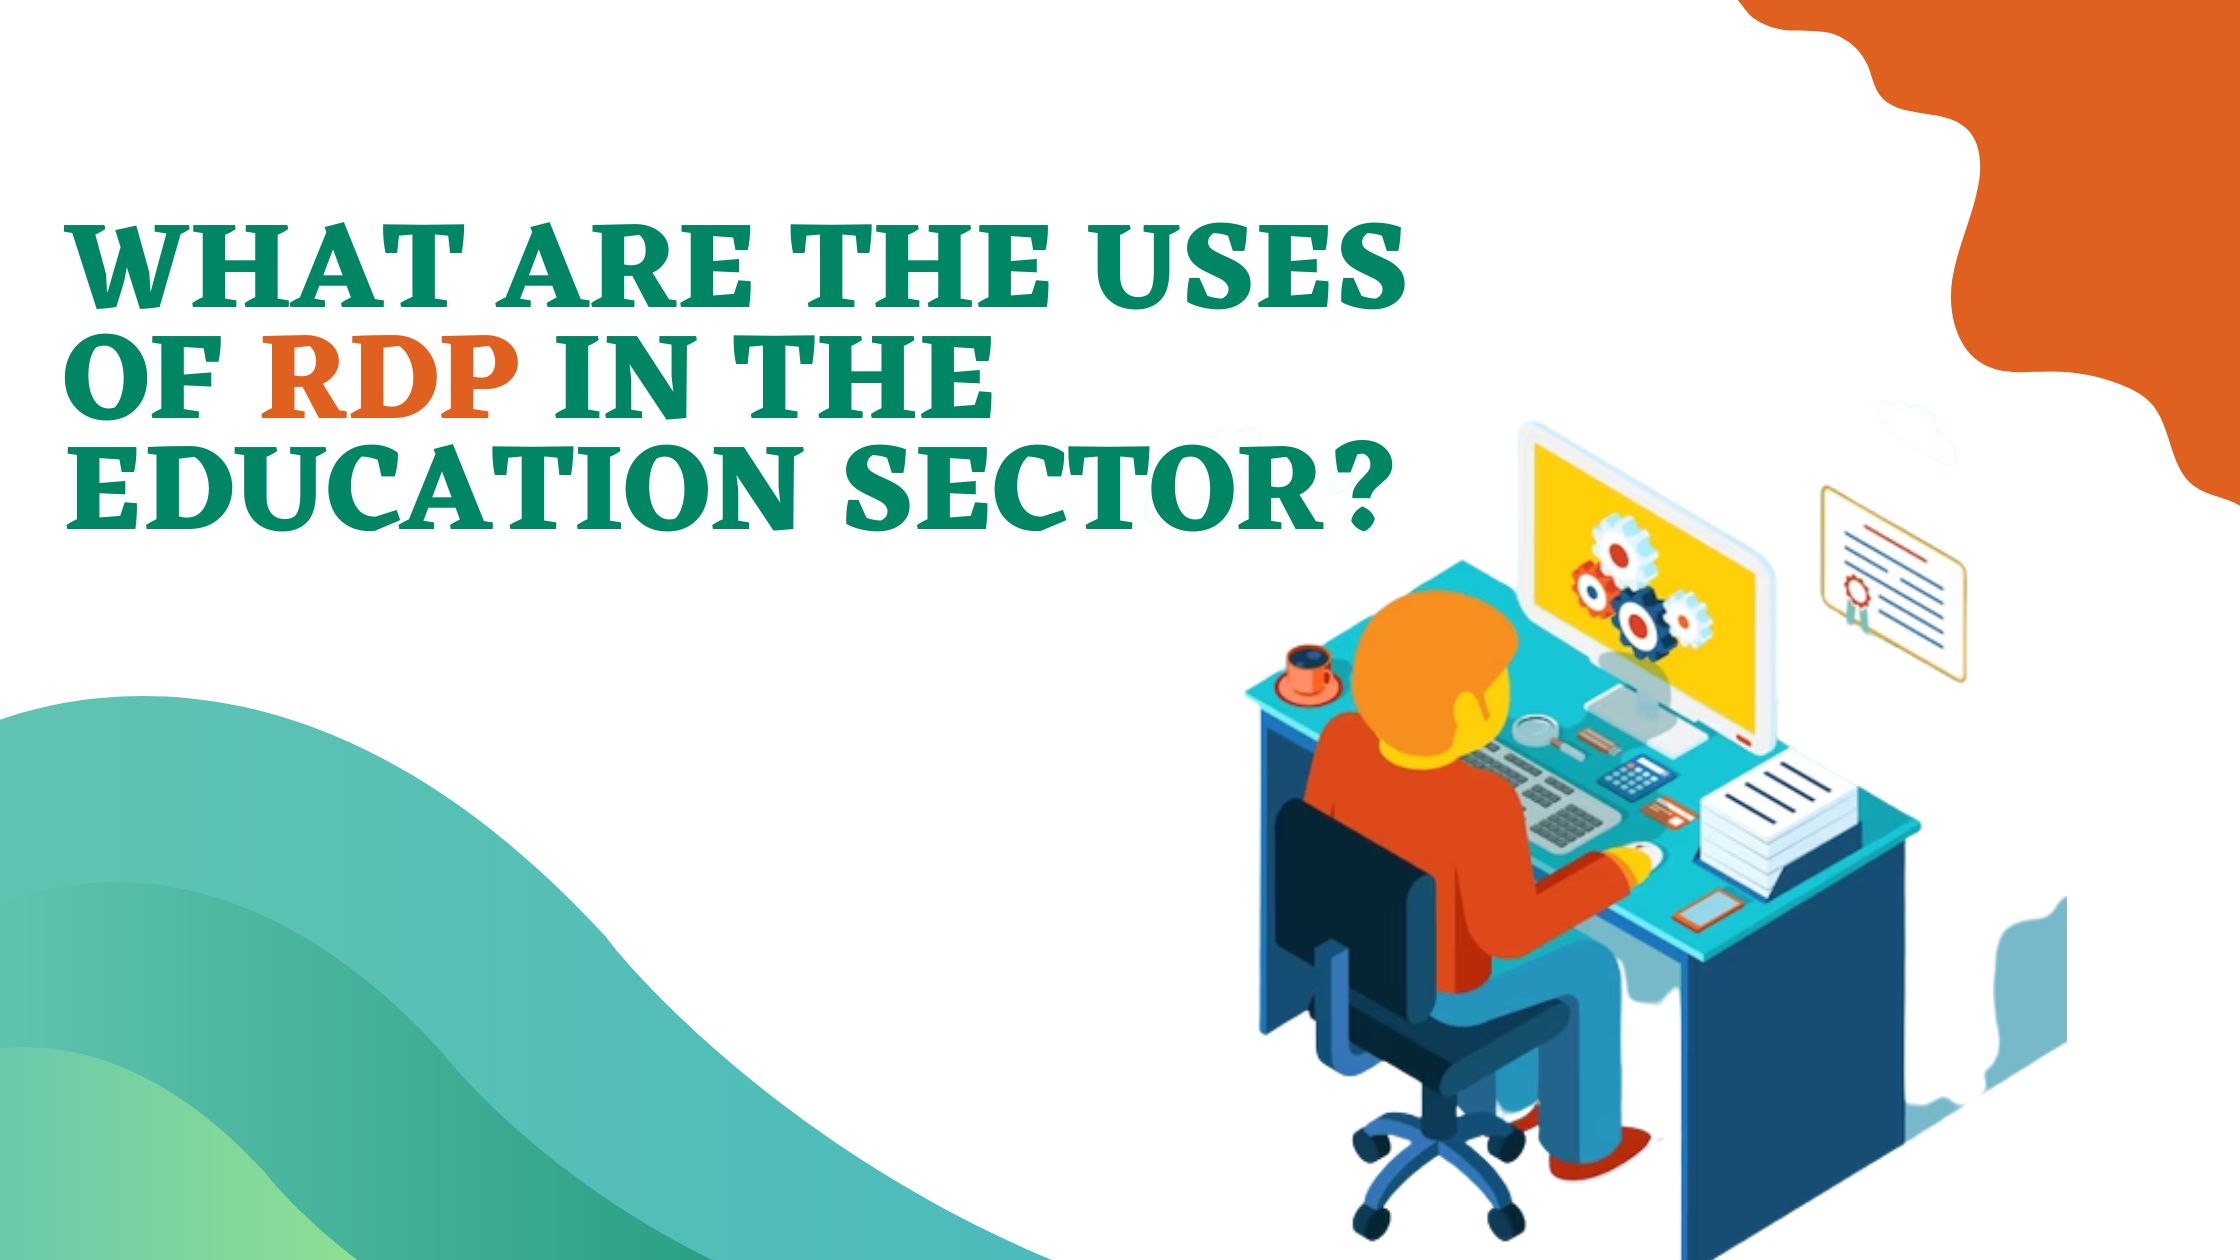 What are the uses of RDP in the Education Sector?